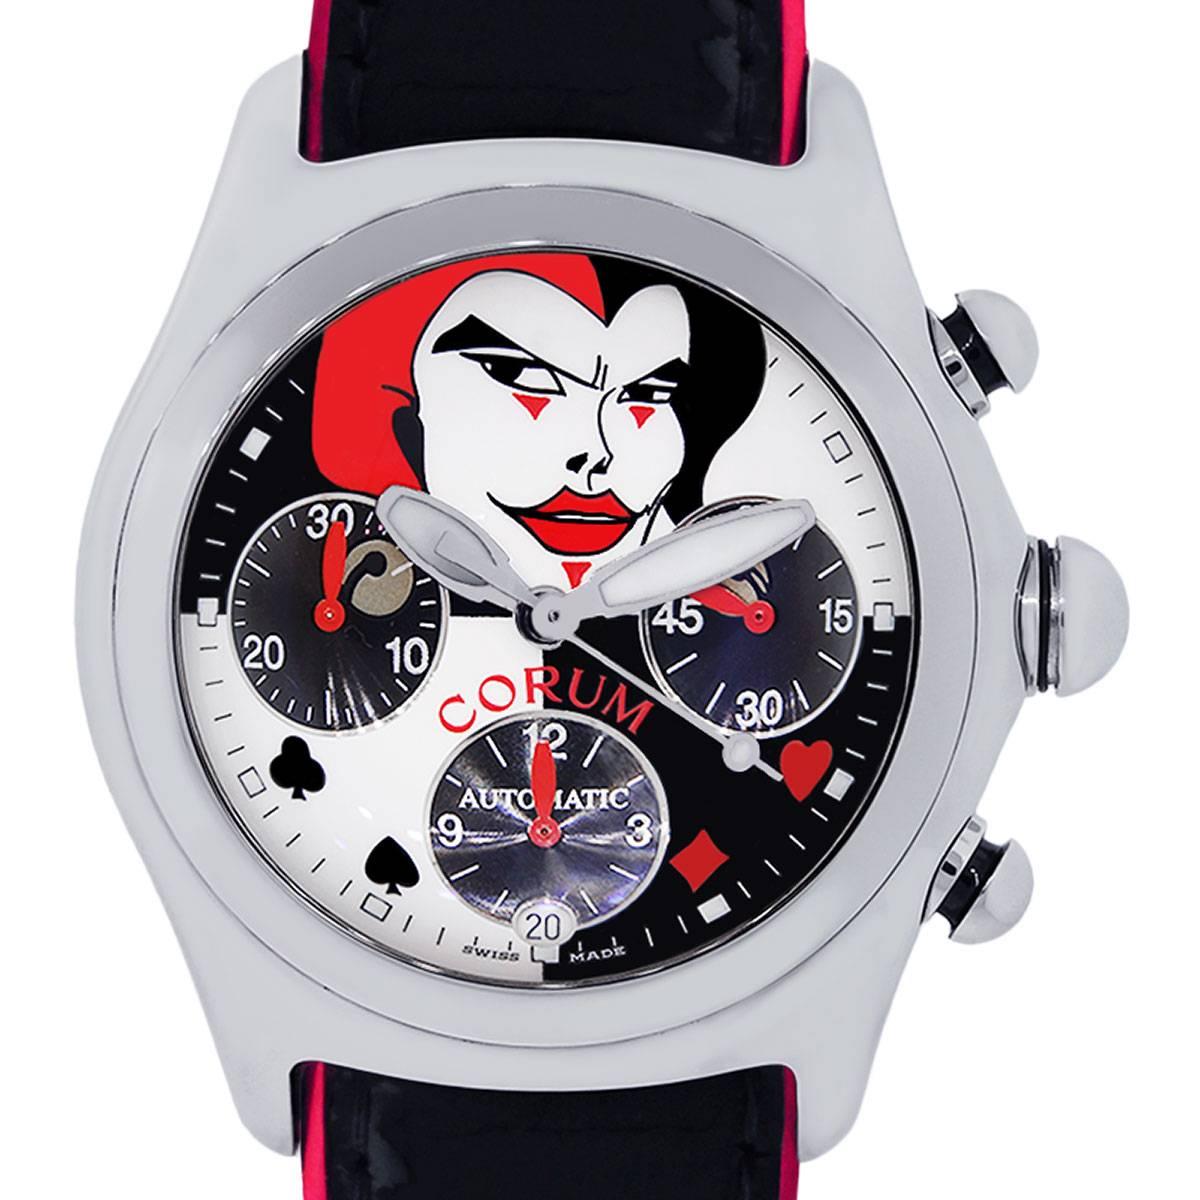 Corum Bubble Limited Edition Joker Stainless Steel Chronograph Watch